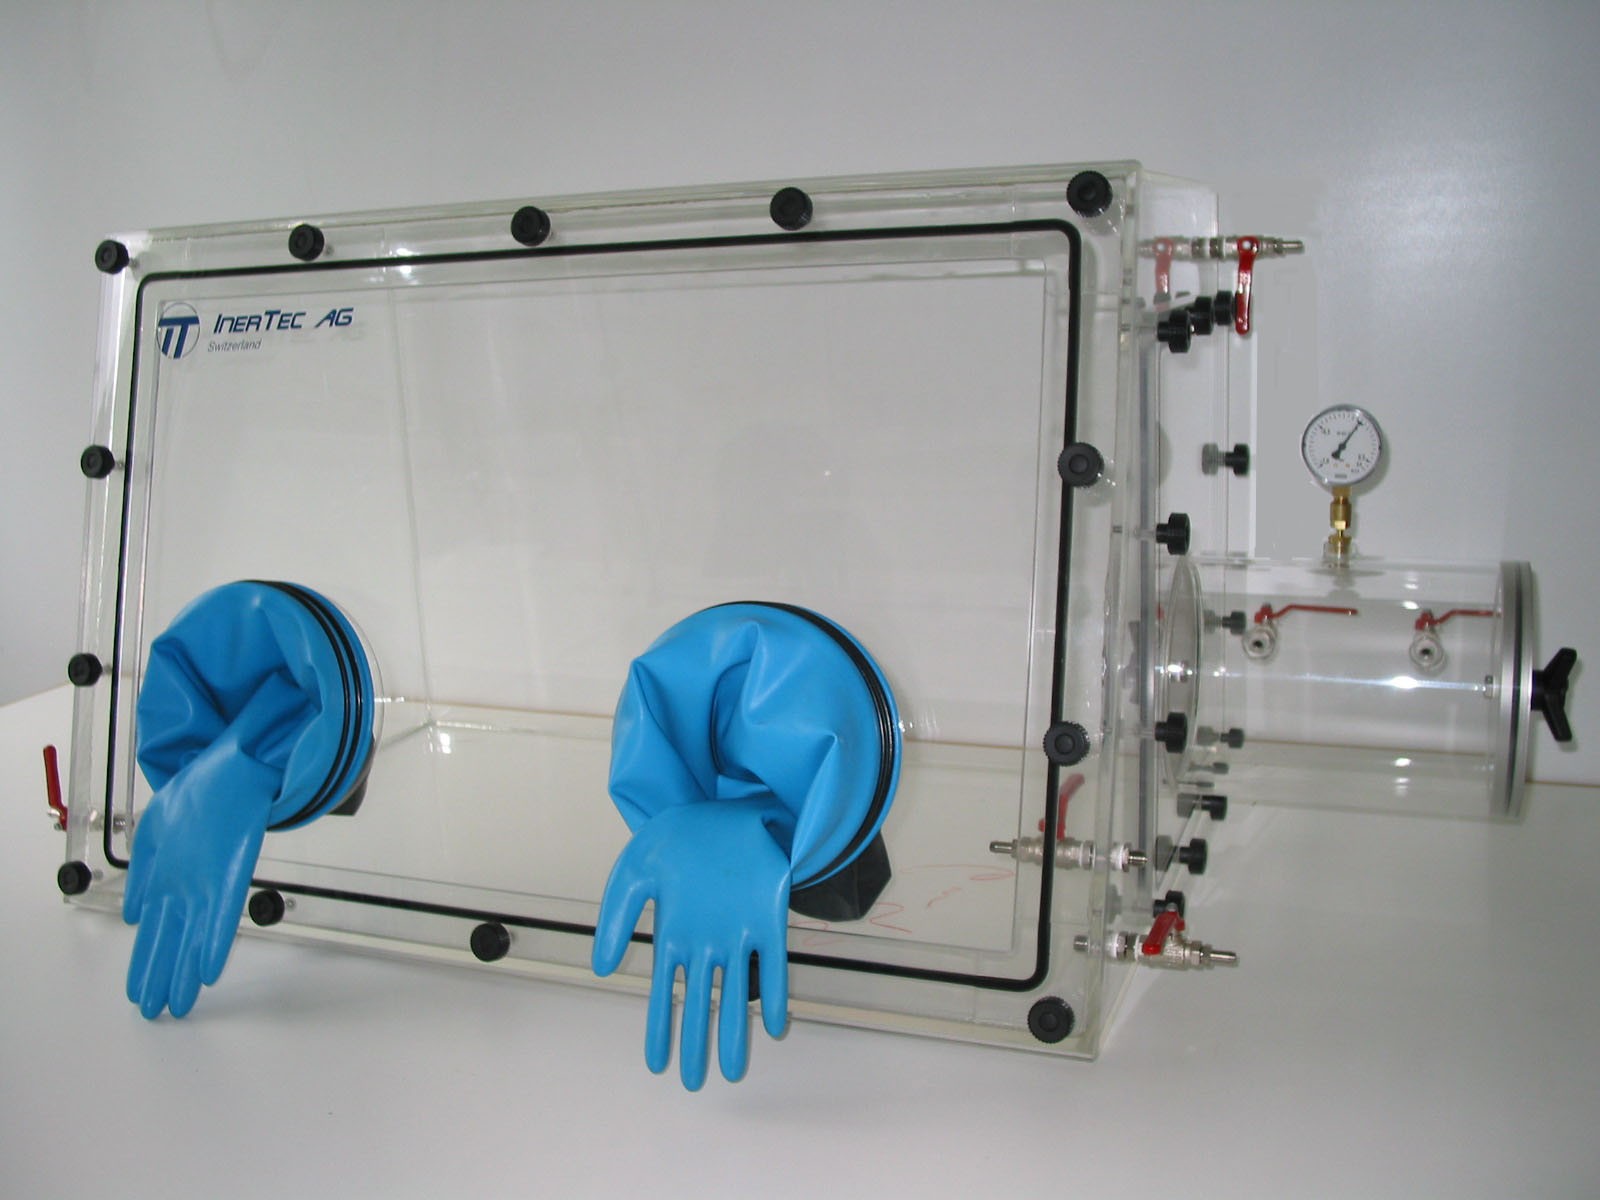 Glovebox made of acrylic&gt; Gas filling: automatic flushing with pressure control, front design: swivels upwards, side design: removable flange Control: oxygen regulator with data logger